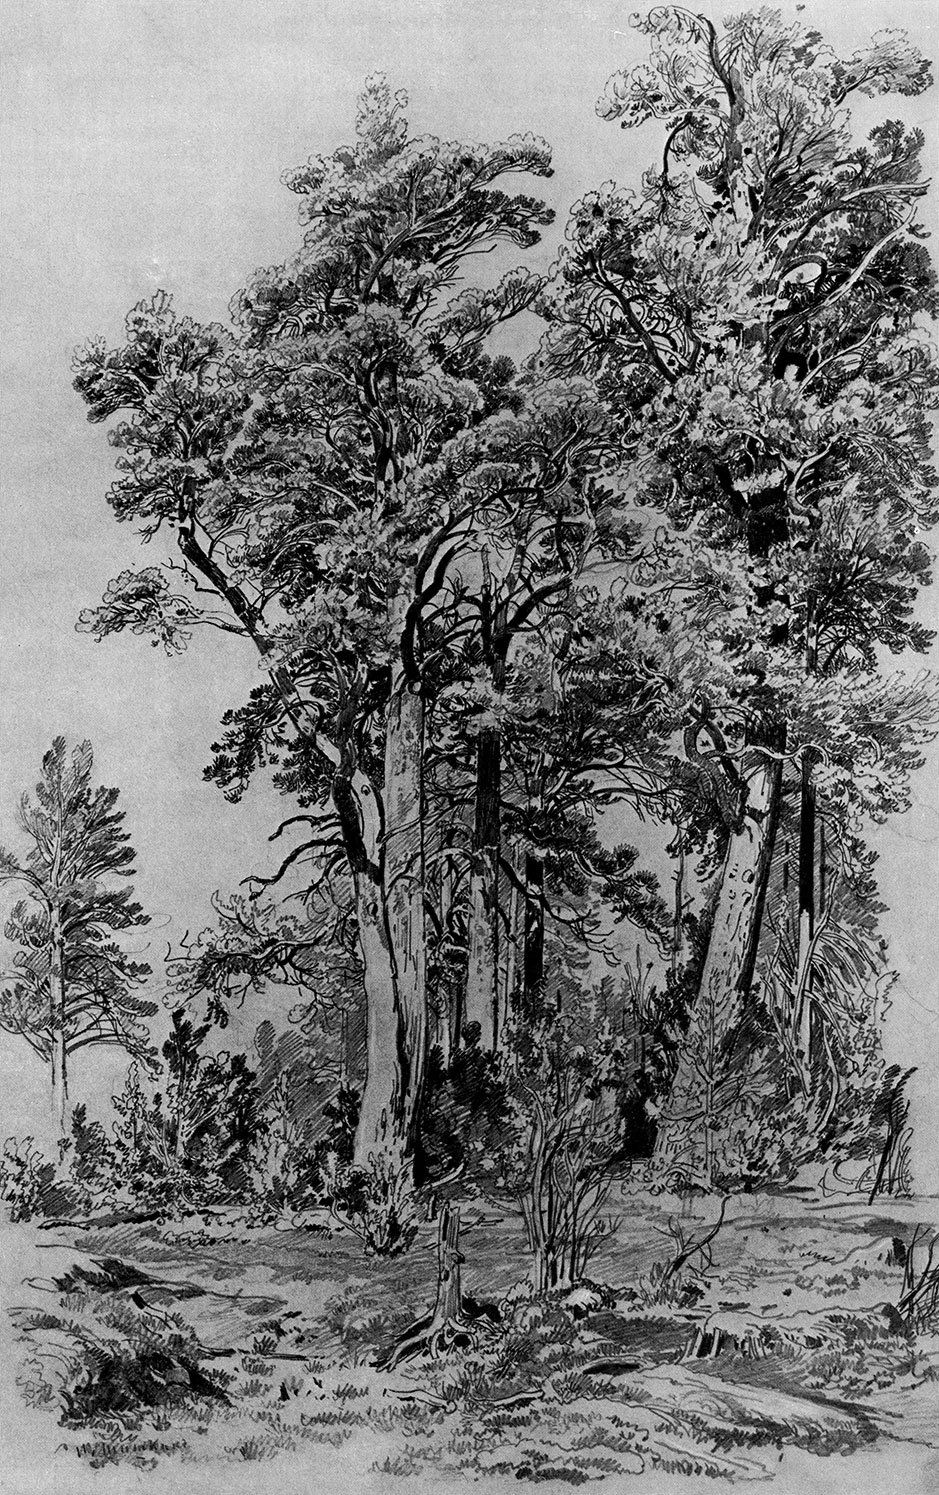 124. Pines. 1889. Lead pencil on paper. 69.1X40.5 cm. (exposed area). The Russian Museum, Leningrad